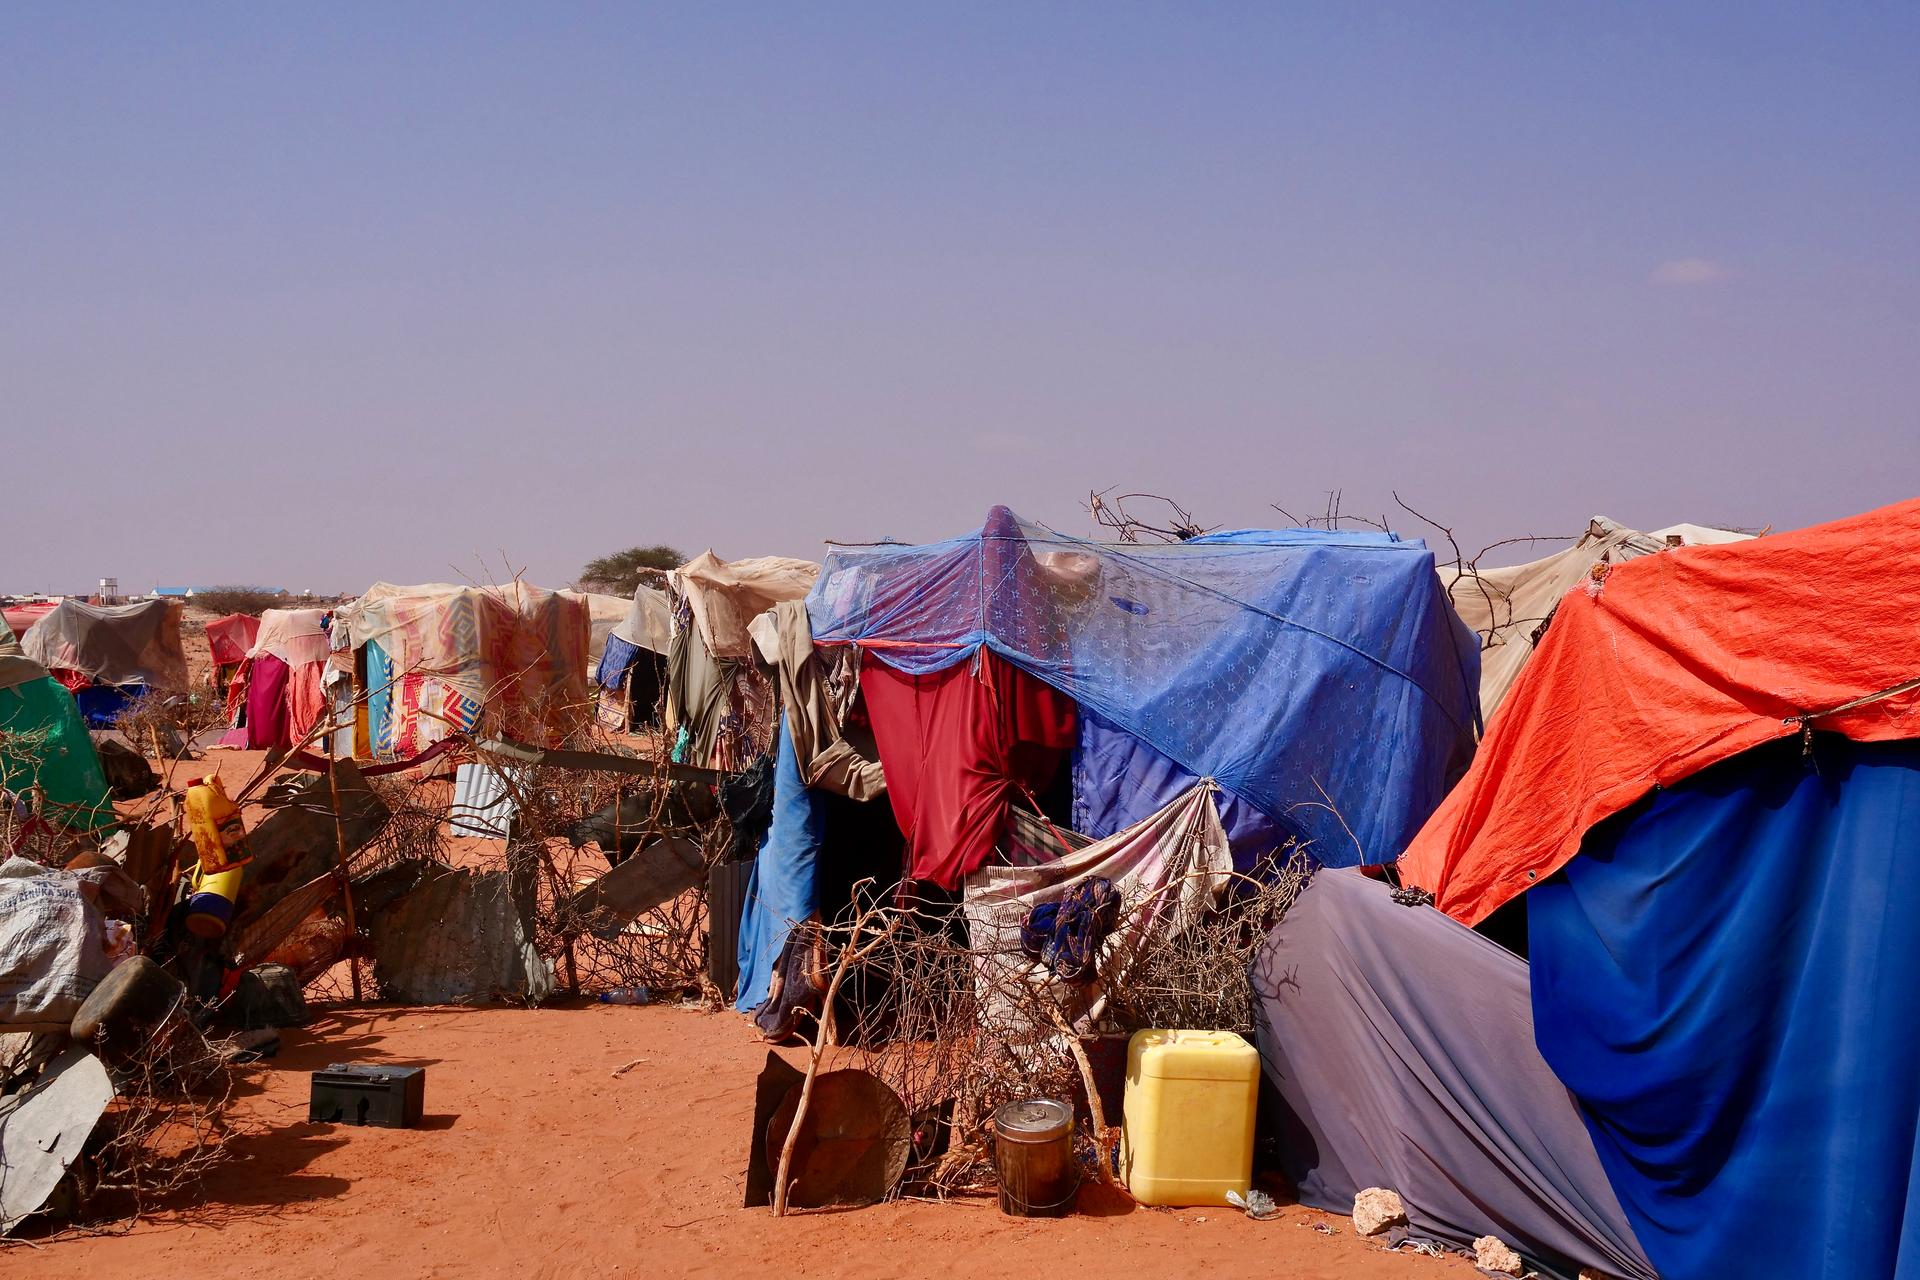 Makeshift homes at an IDP camp in Galkayo, Somalia, where people have come in search of food and water amid the ongoing drought.